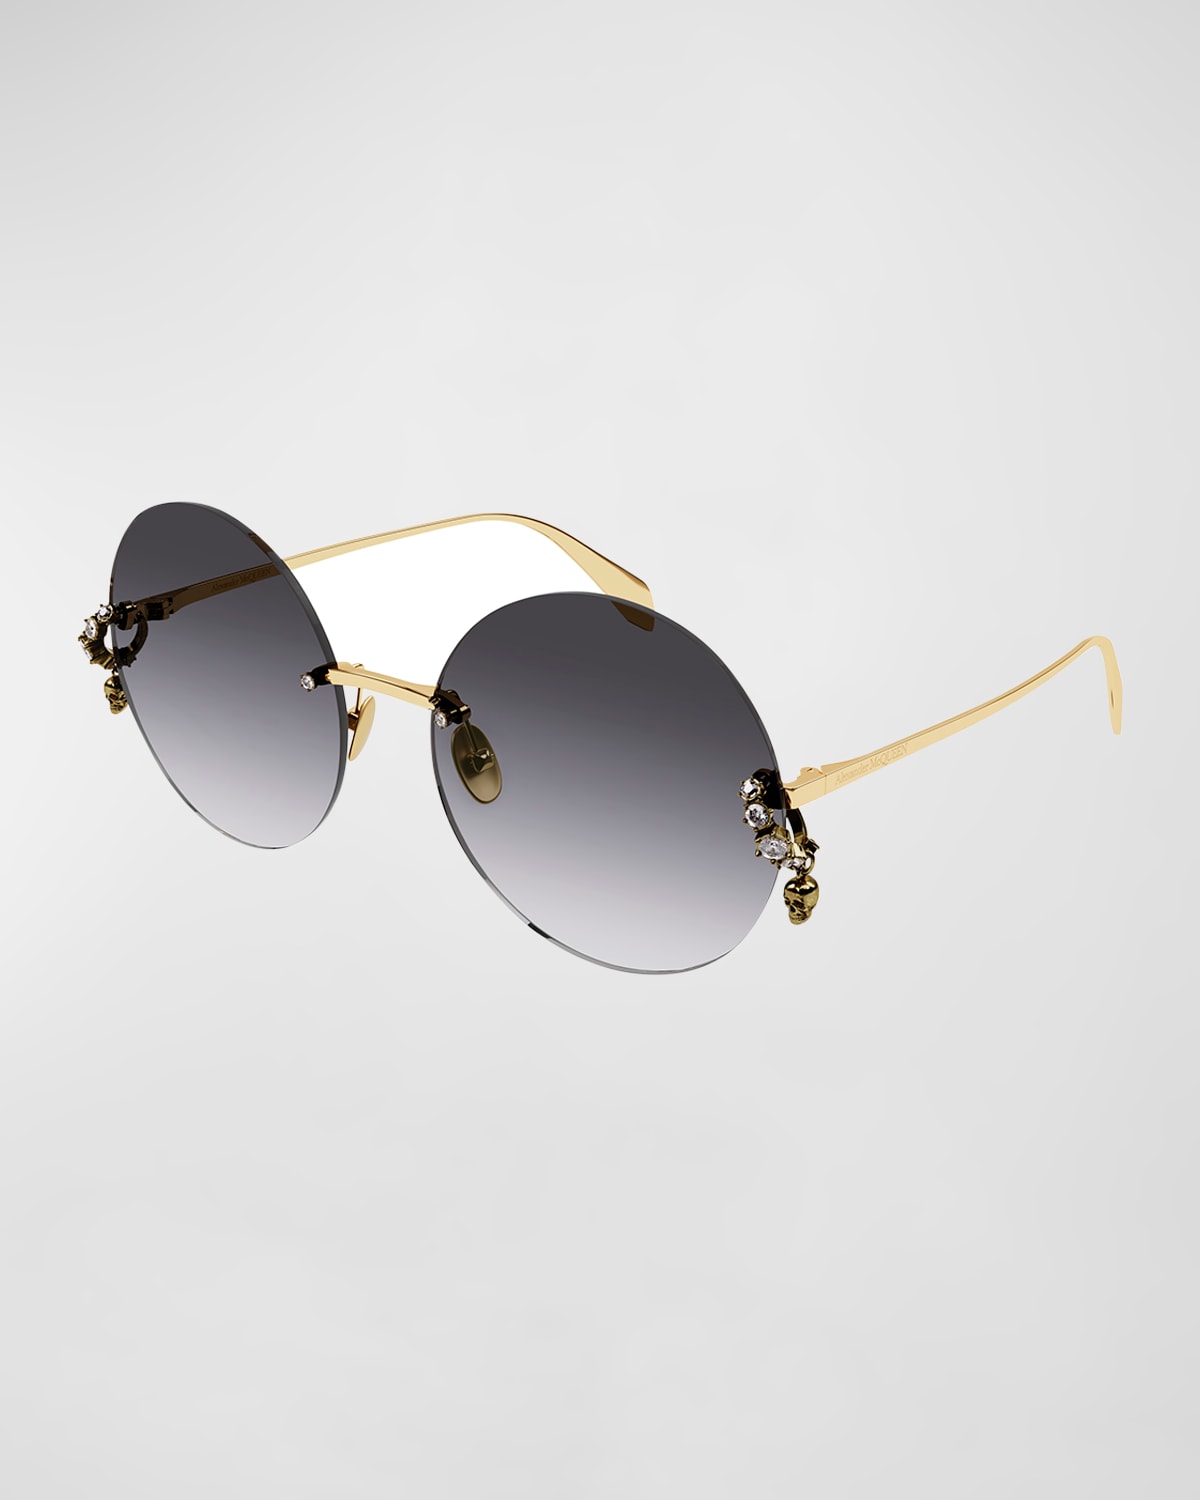 Shop Alexander Mcqueen Metal Round Sunglasses W/ Skull Crystal Details In 001 Shiny Gold